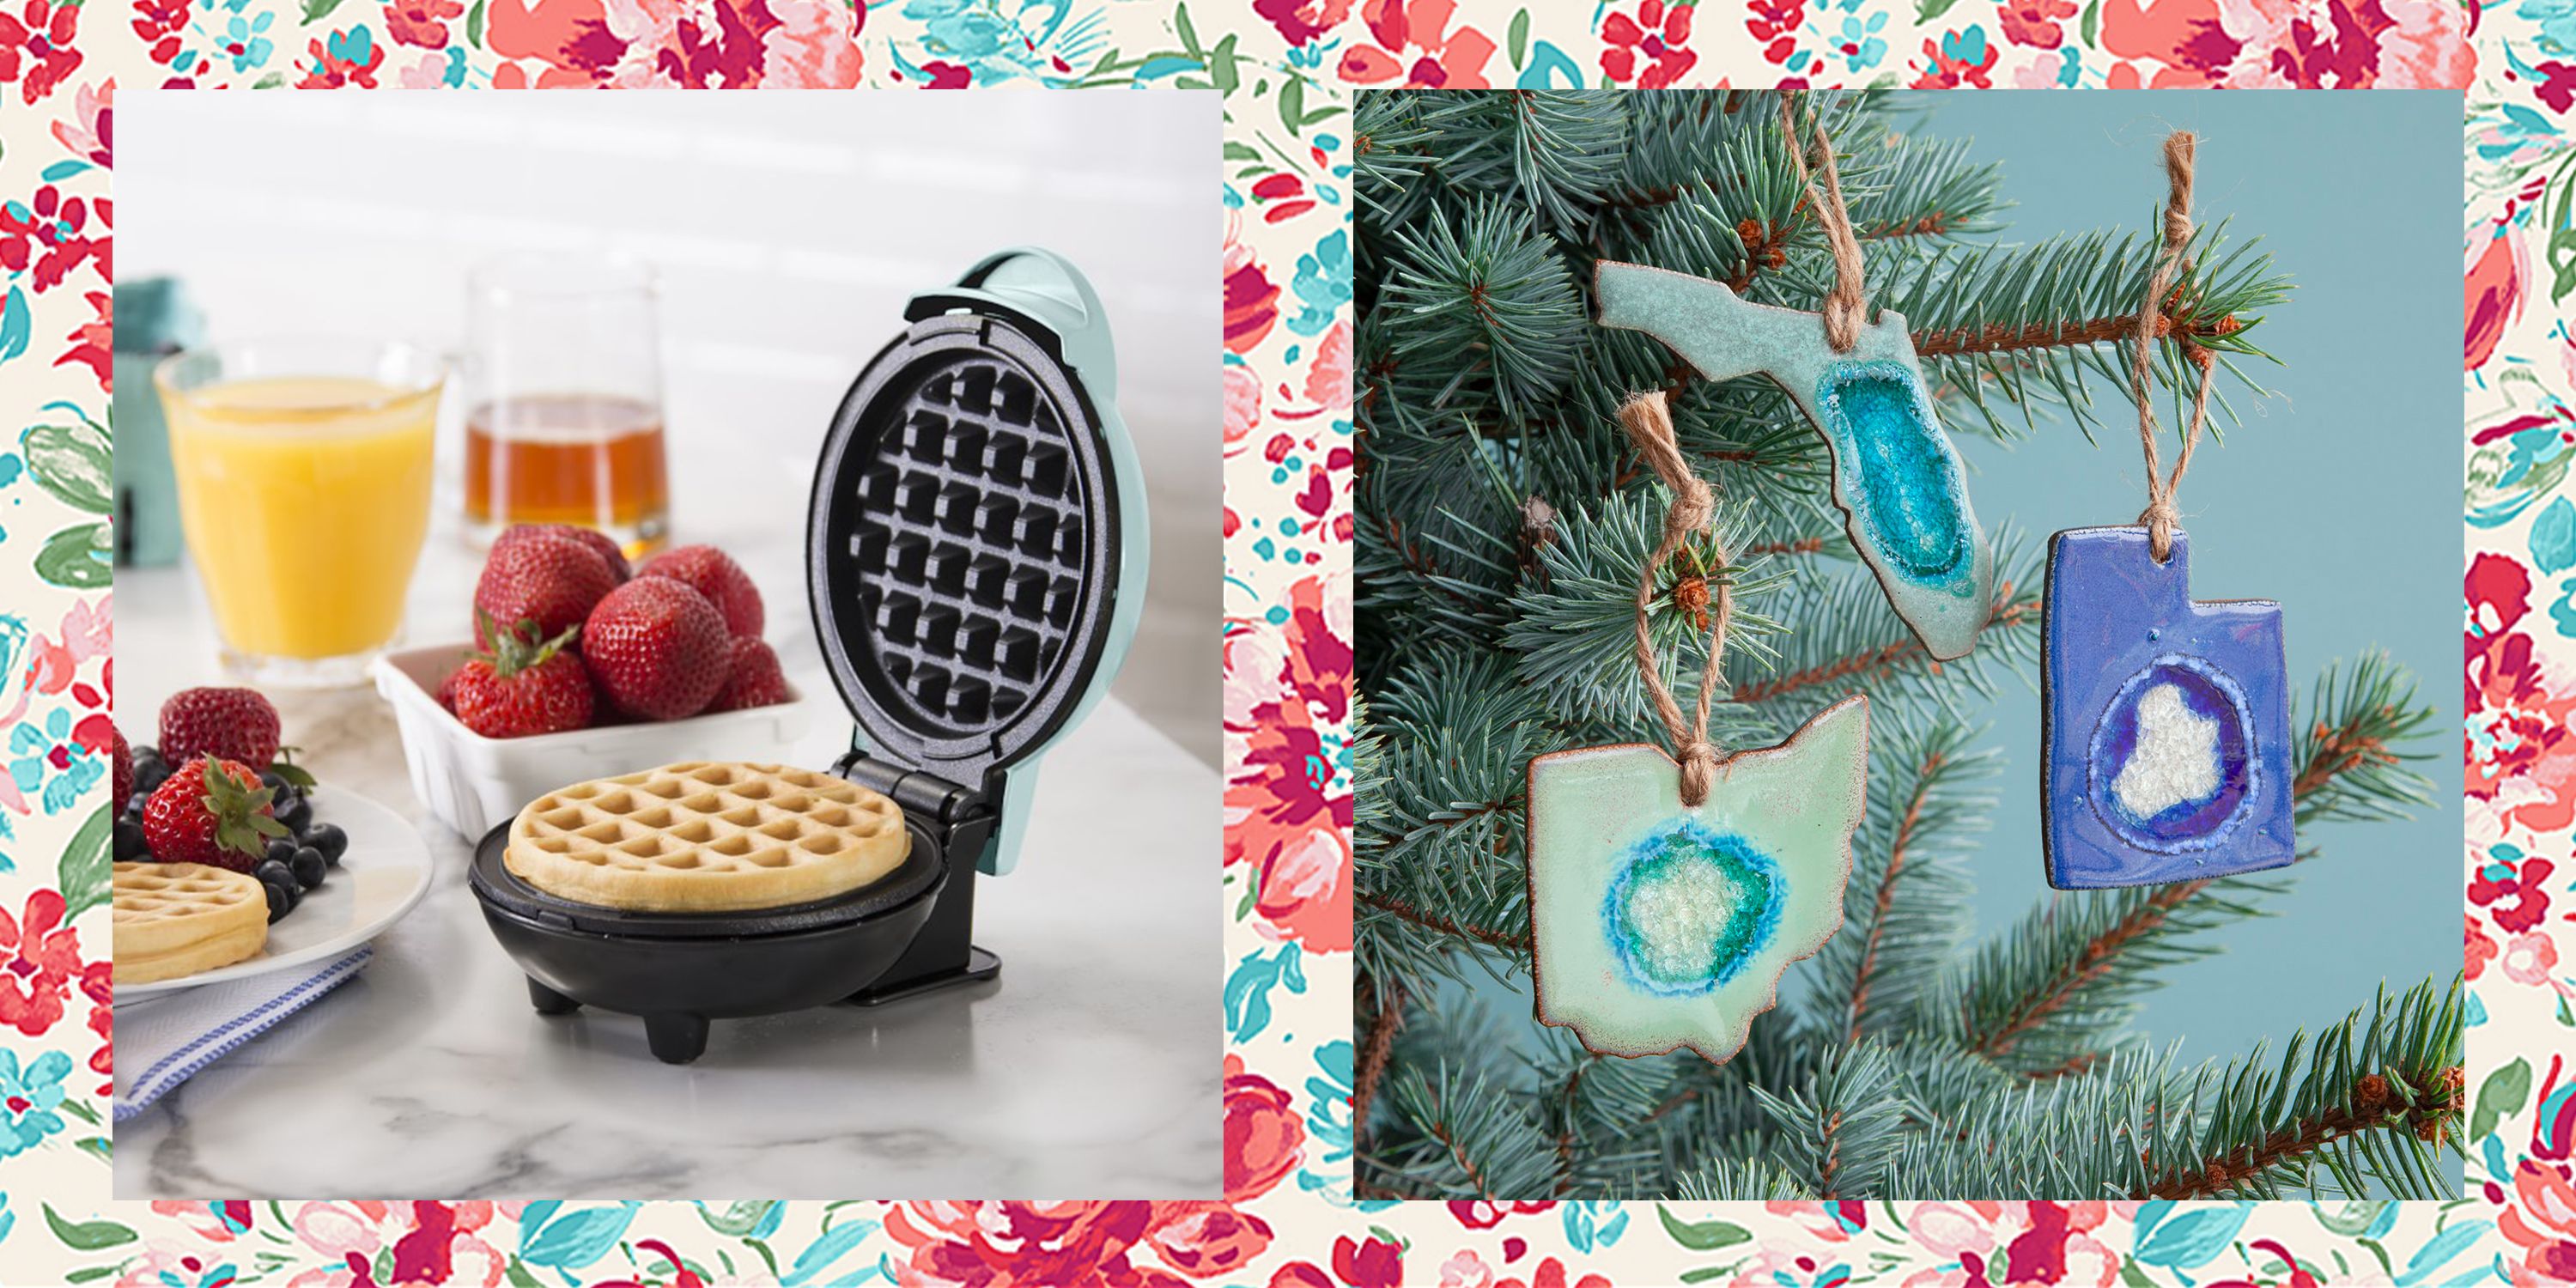 16 Secret Santa Gifts Under $25 For Any Type Of Person